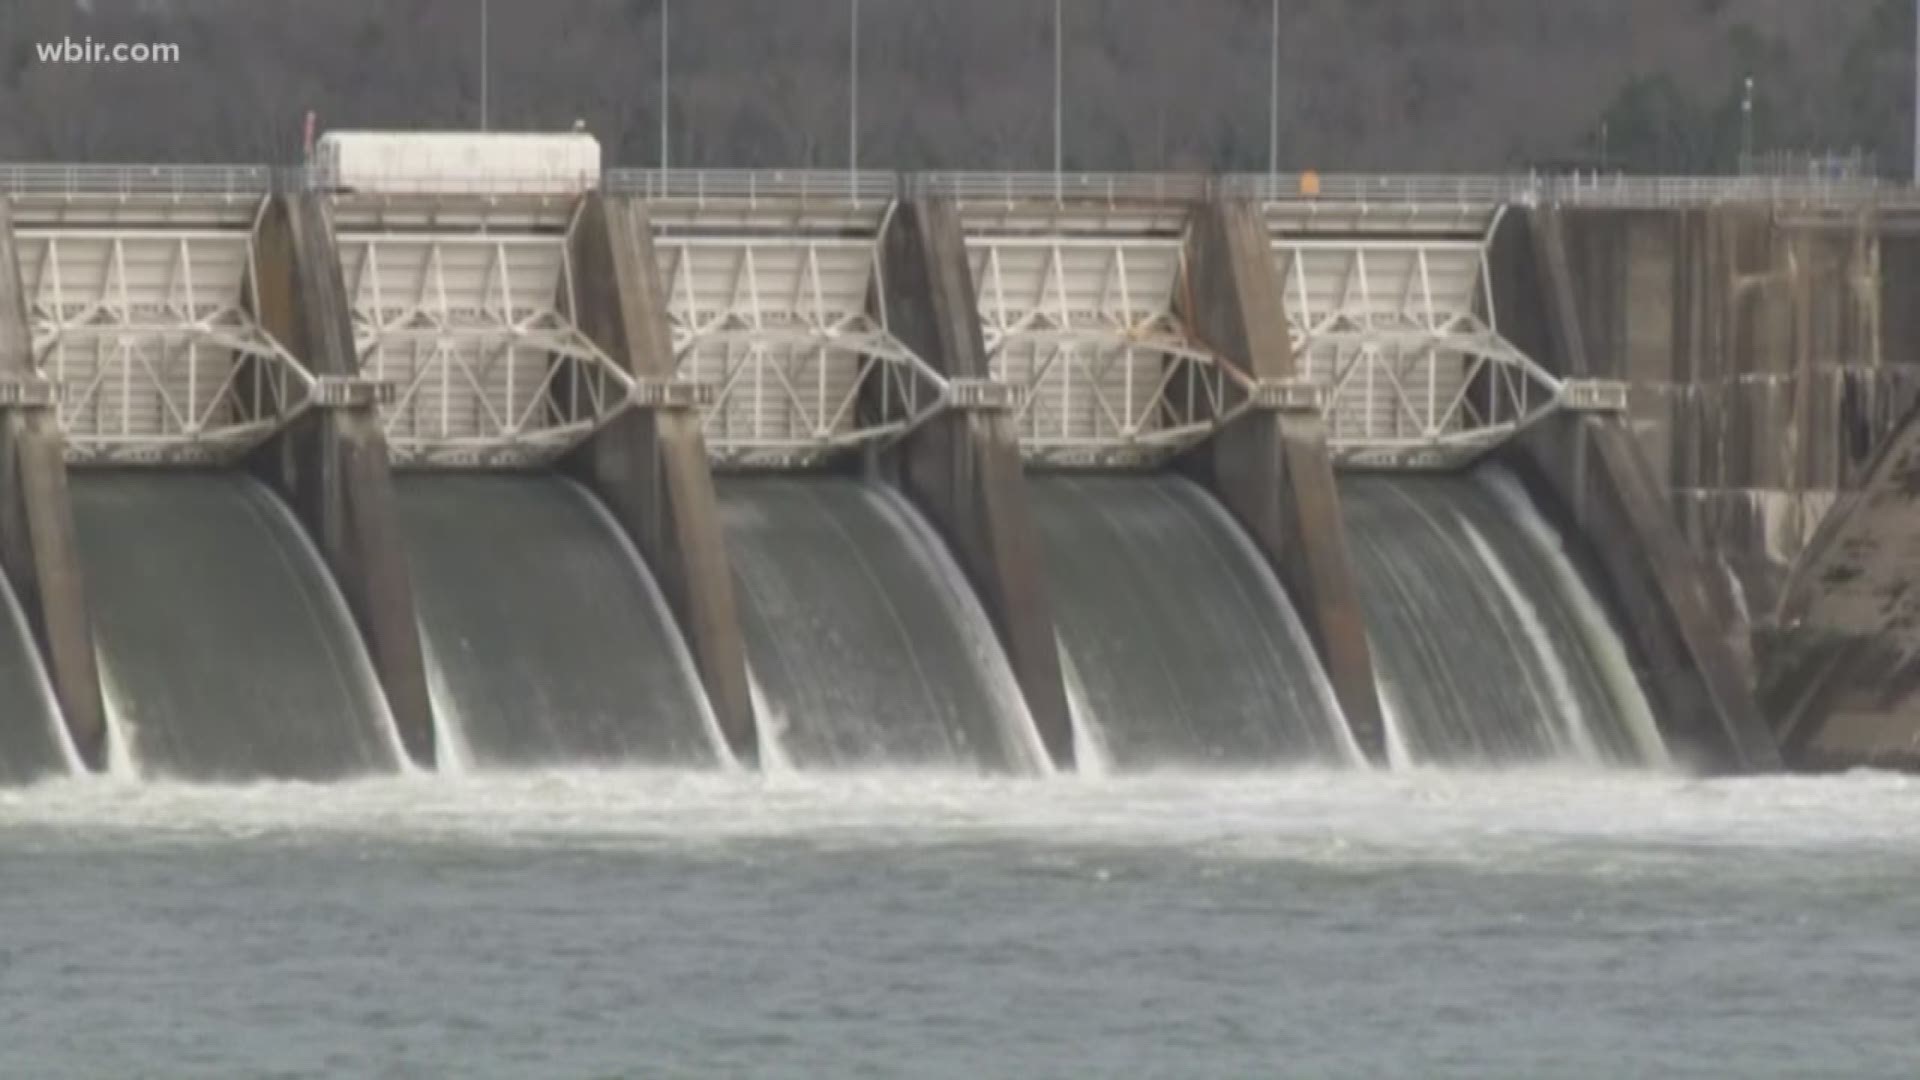 With the rain expected to move into our area this week, the Tennessee Valley Authority is getting ready for possibly high water levels.